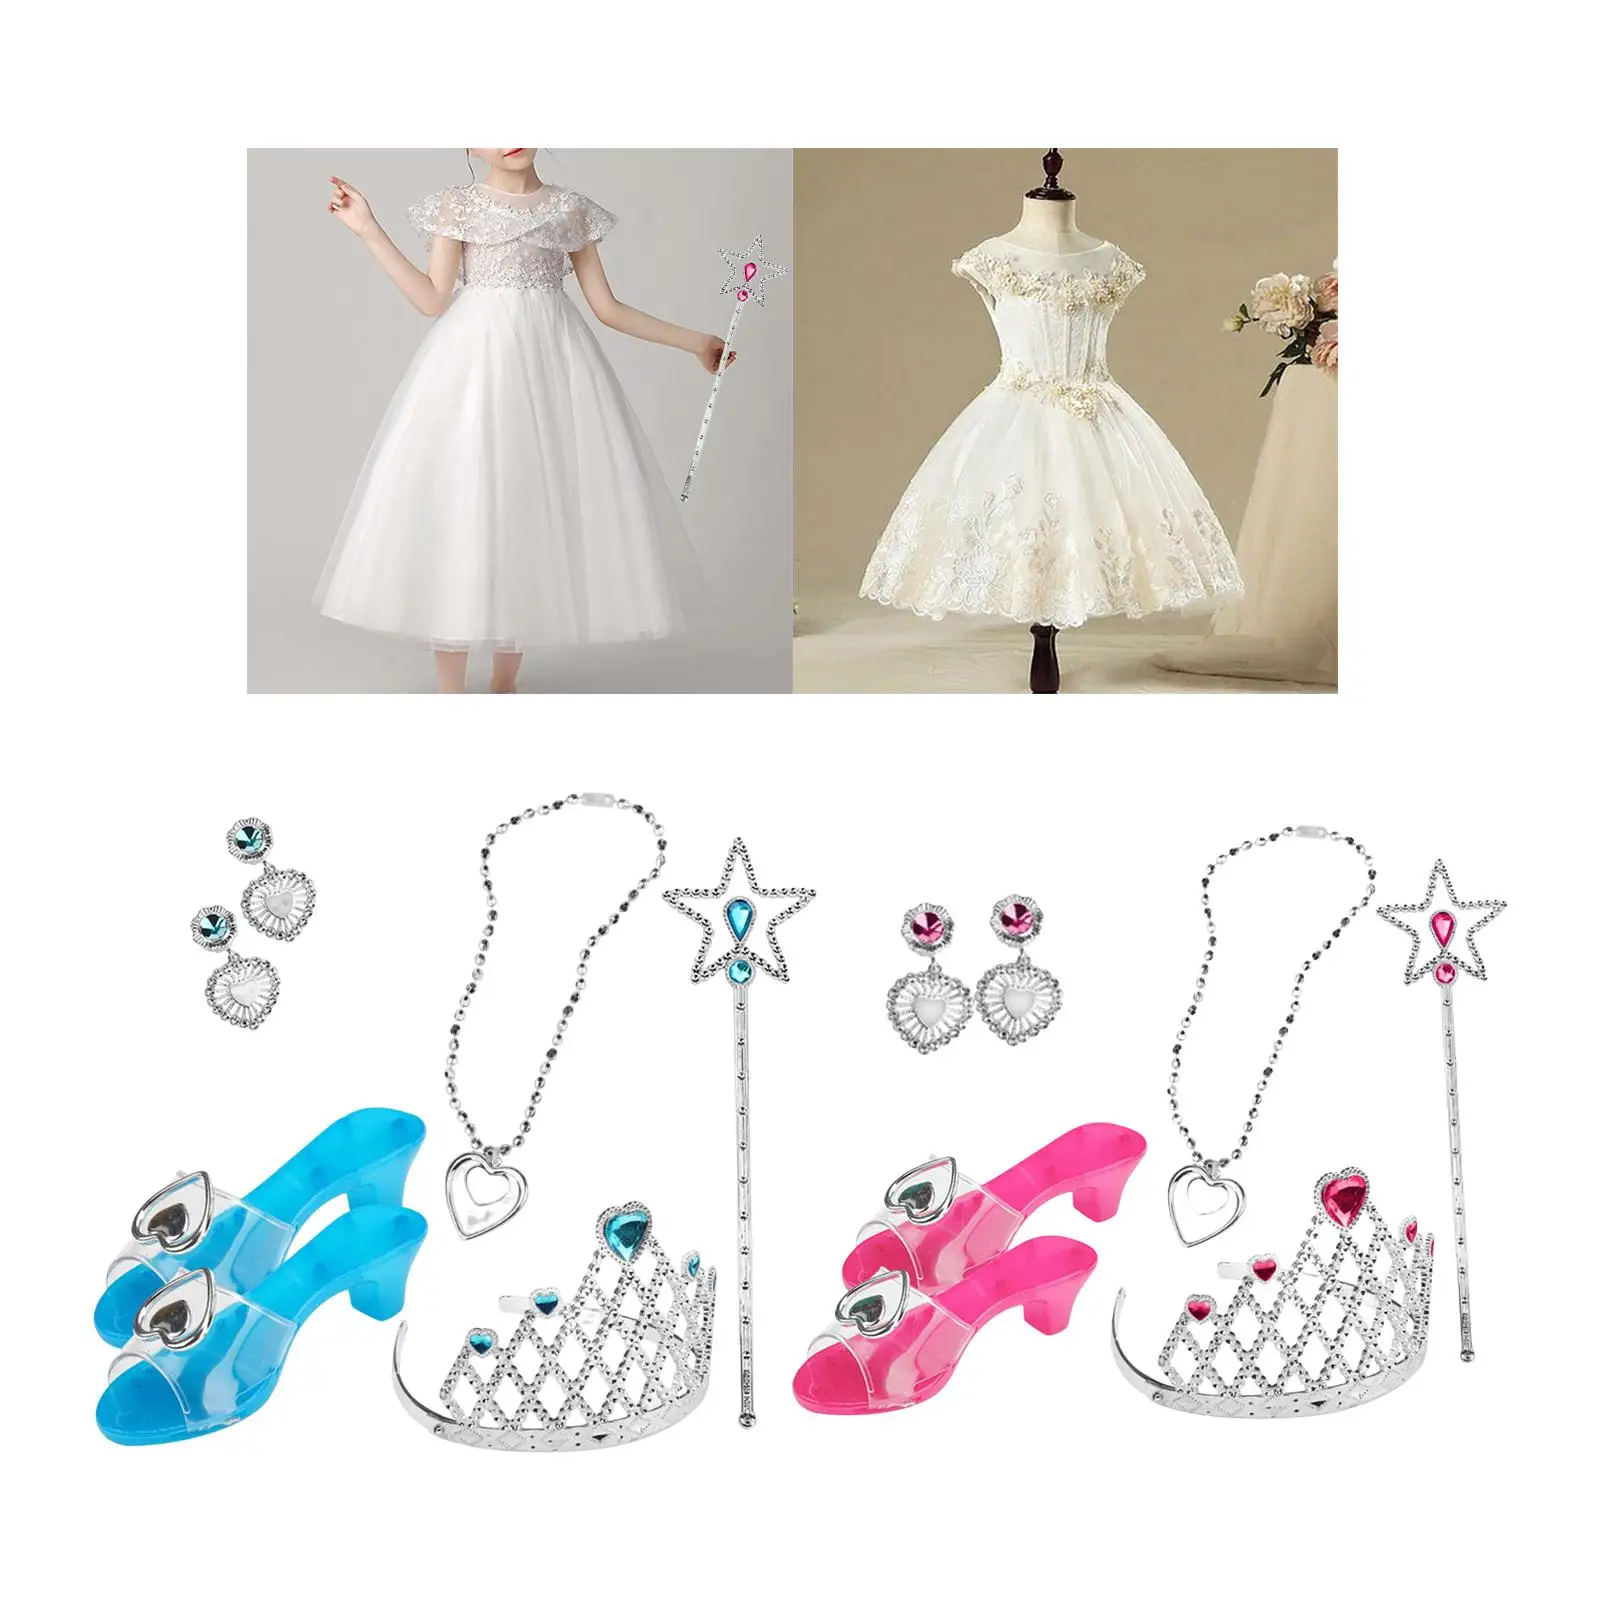 7x Princess Dress up Girls Pretend Play Set Fashion Accessories crowns for Party